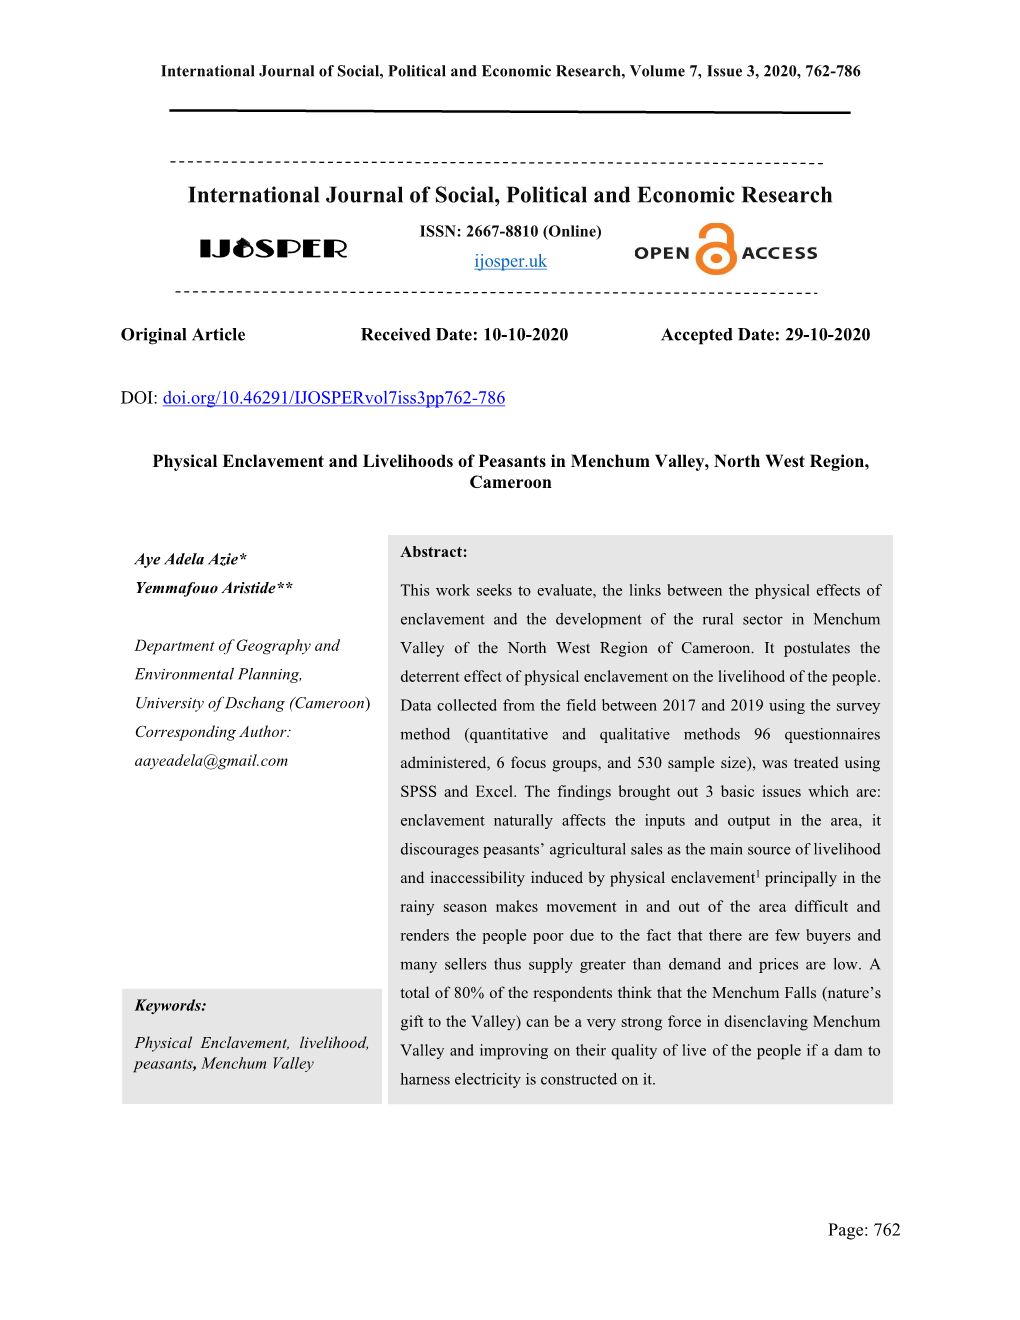 International Journal of Social, Political and Economic Research, Volume 7, Issue 3, 2020, 762-786